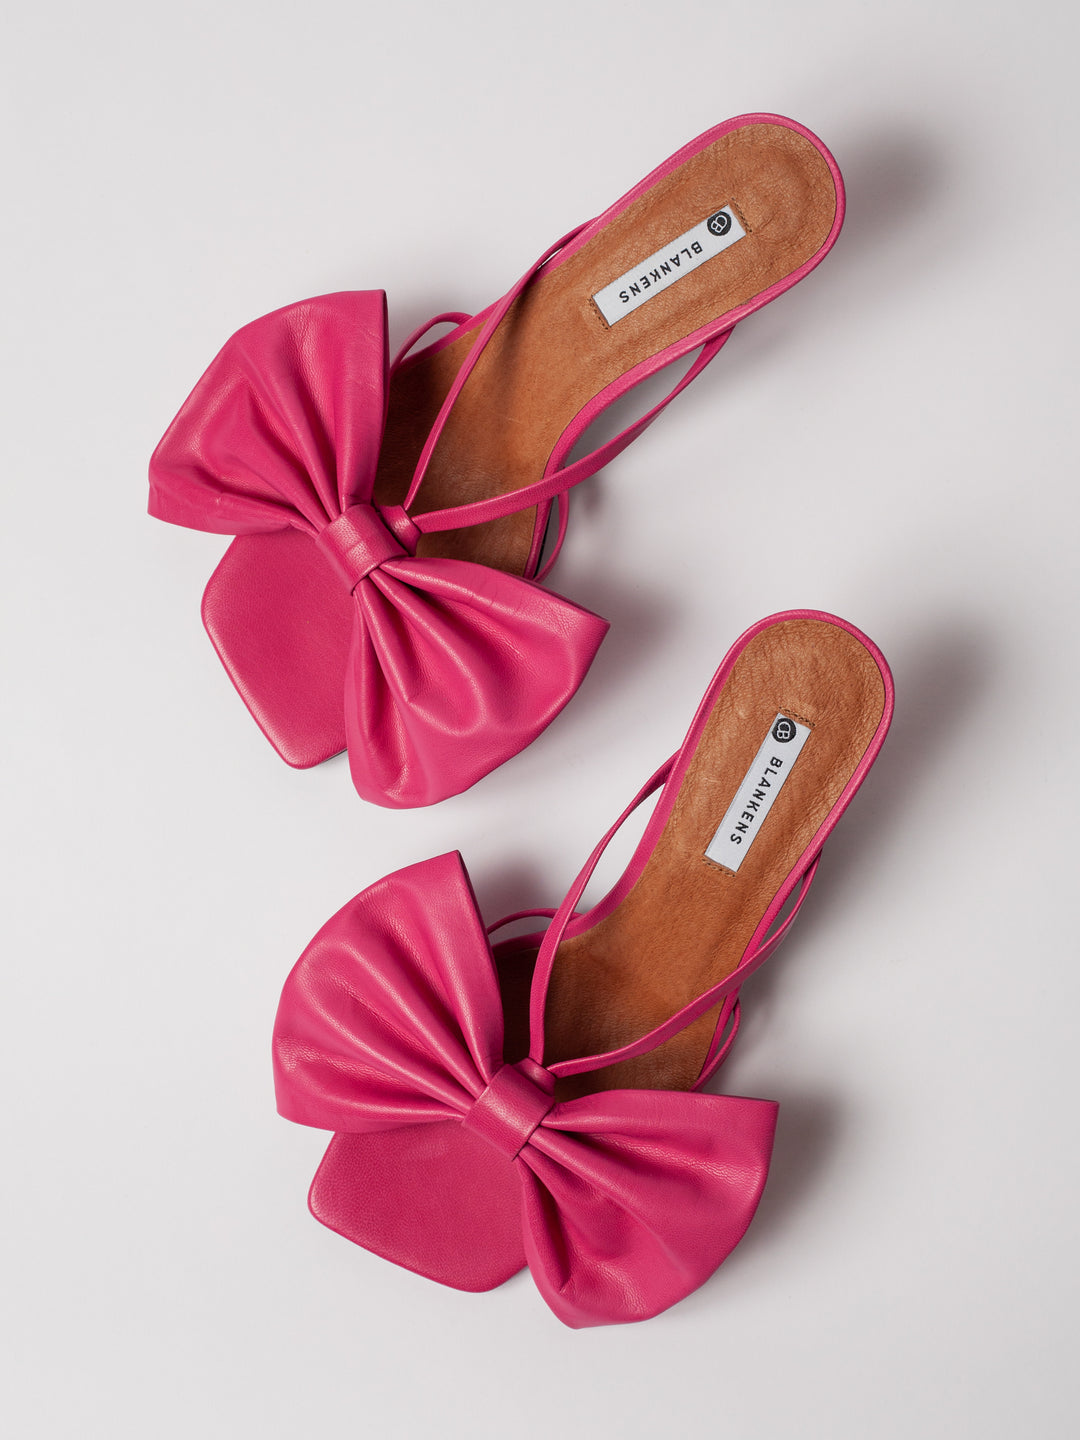 Blankens pink leather heel sandal, big bow. made in Euope. 